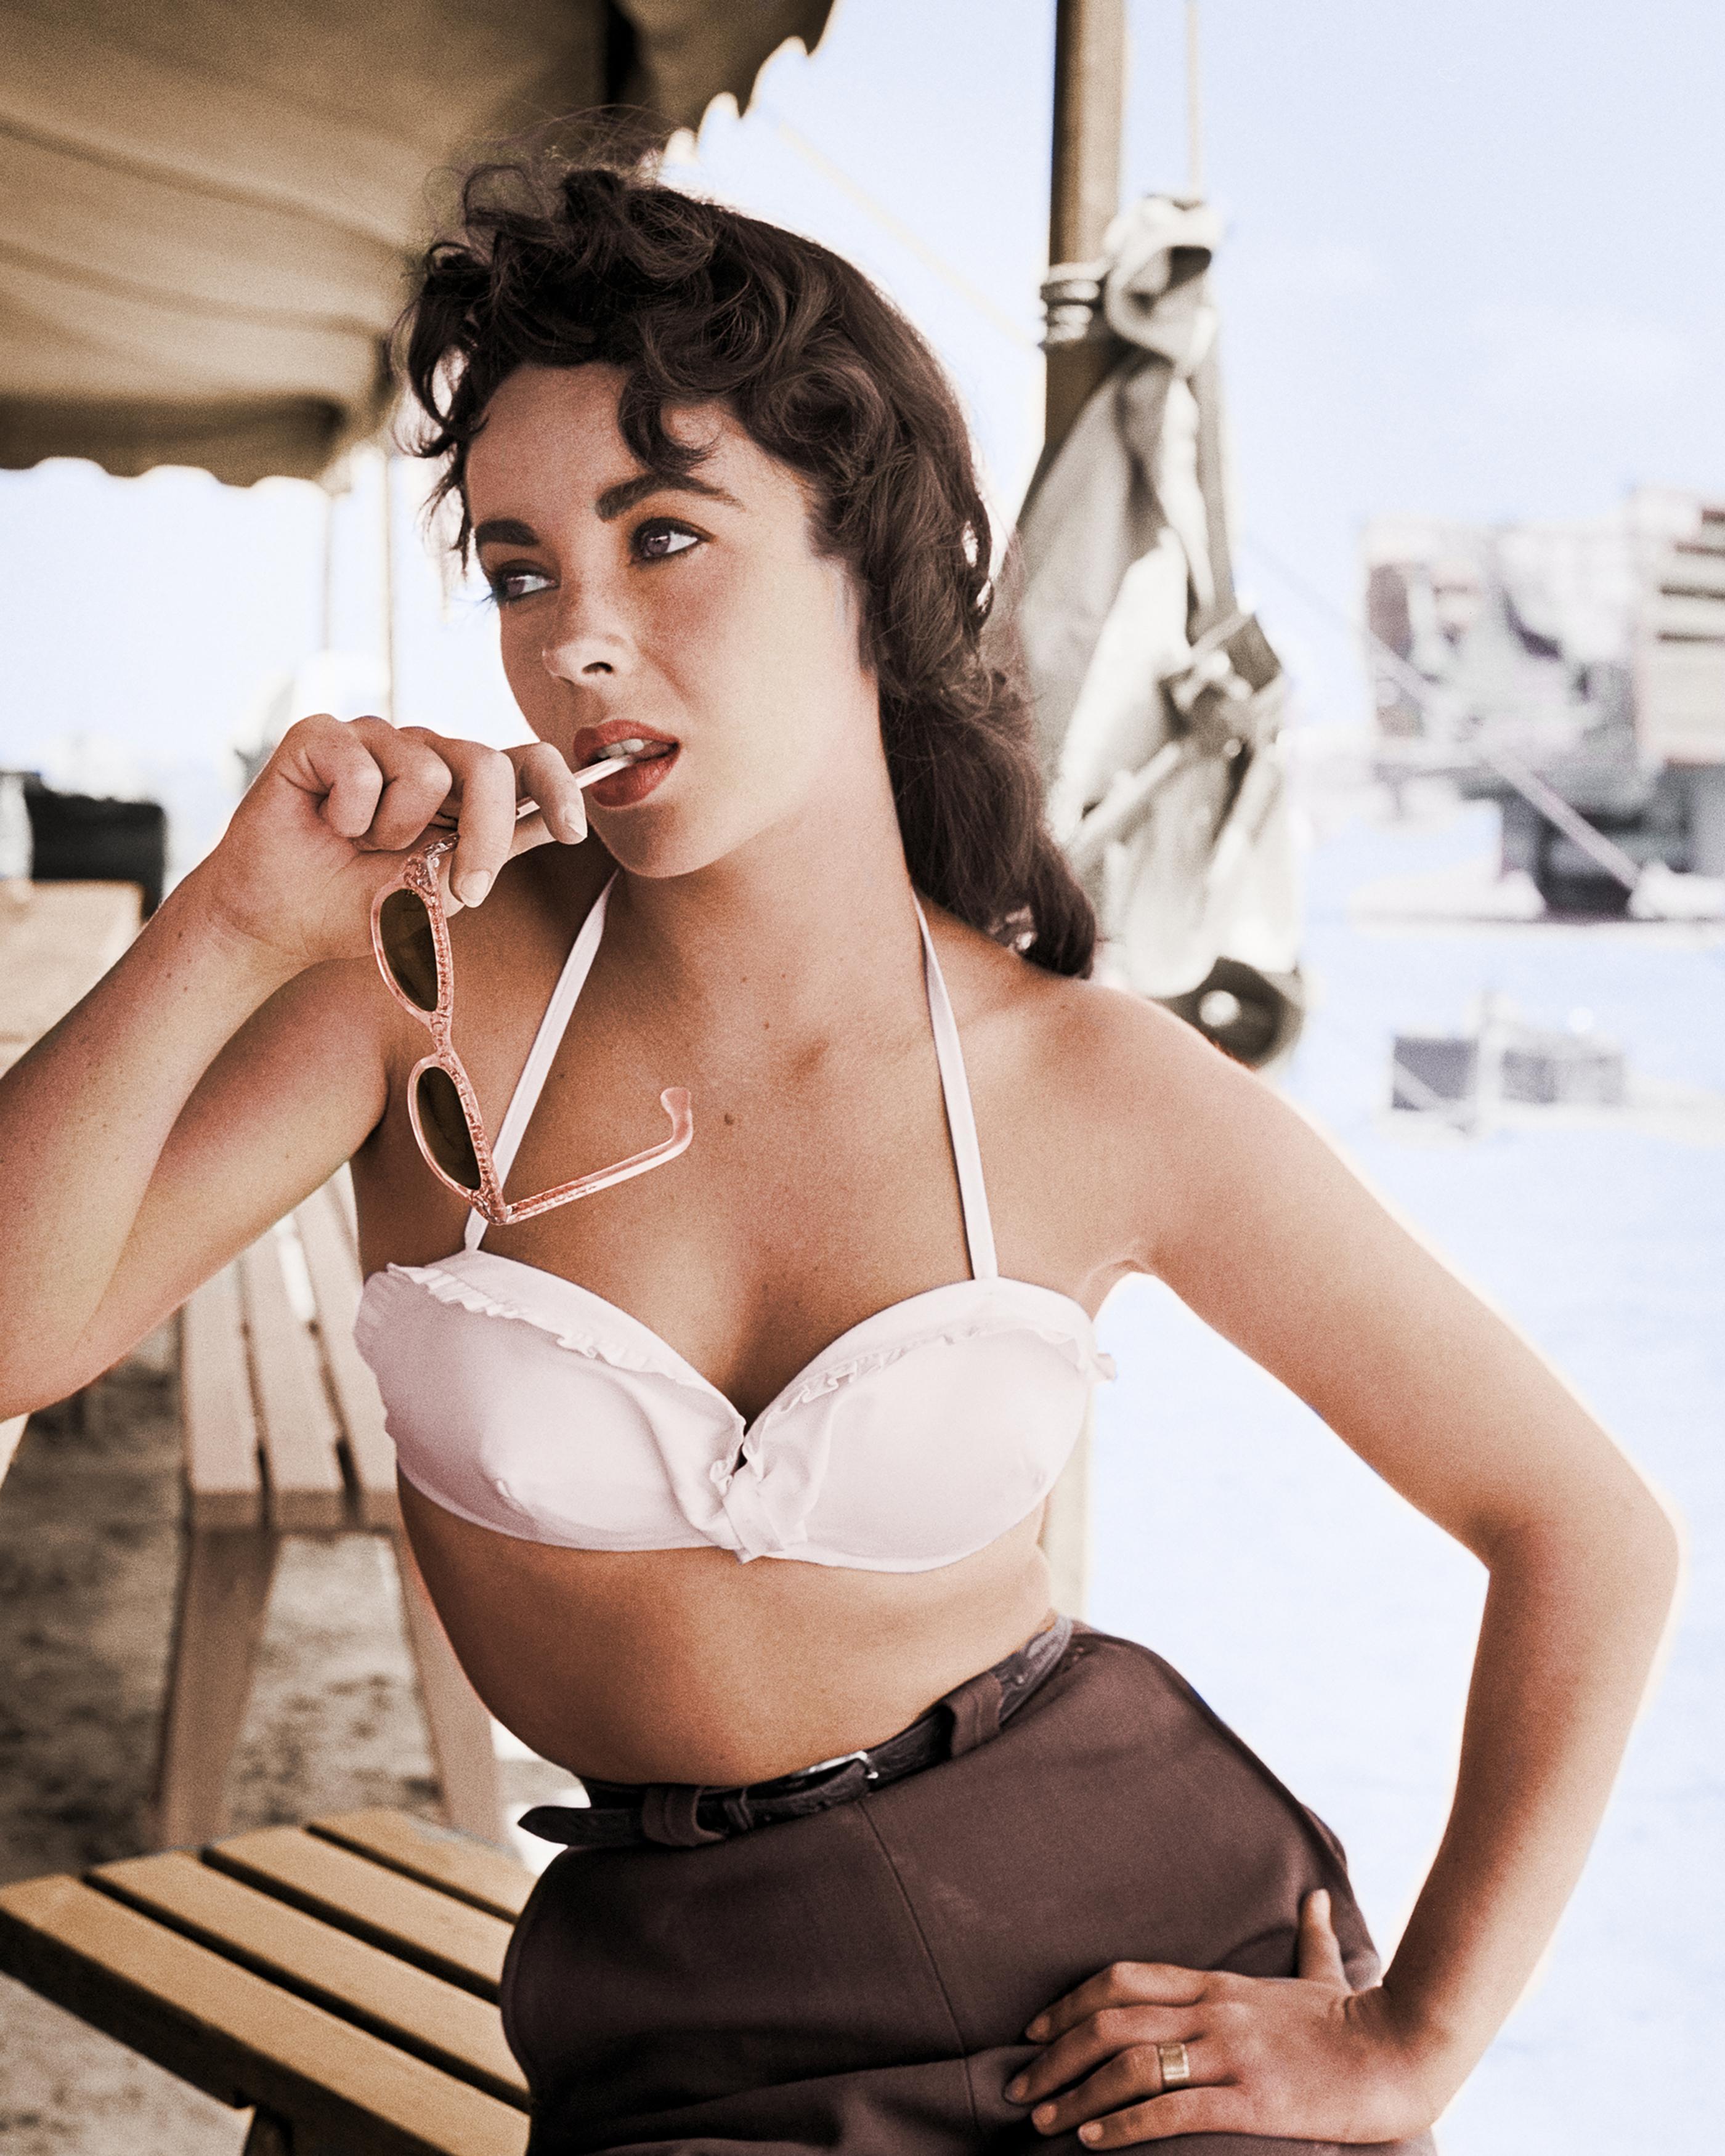 Frank Worth Color Photograph - Elizabeth Taylor with Sunglasses for Giant 20" x 24" Edition of 75